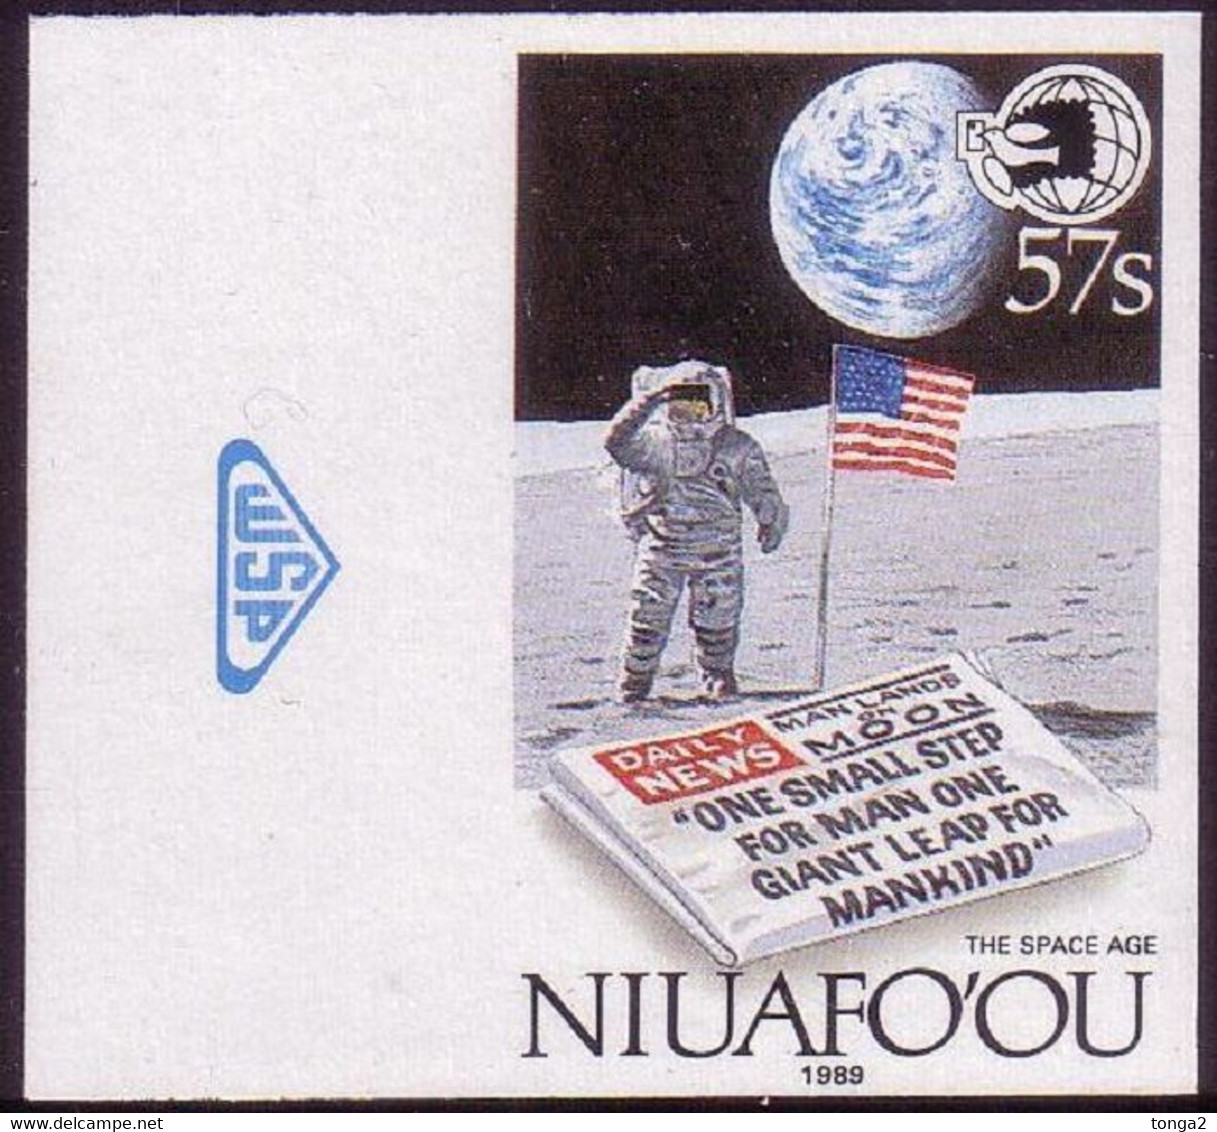 Tonga Niuafo'ou 1989 Apollo - First Man On Moon - Imperf Plate Proof - Océanie